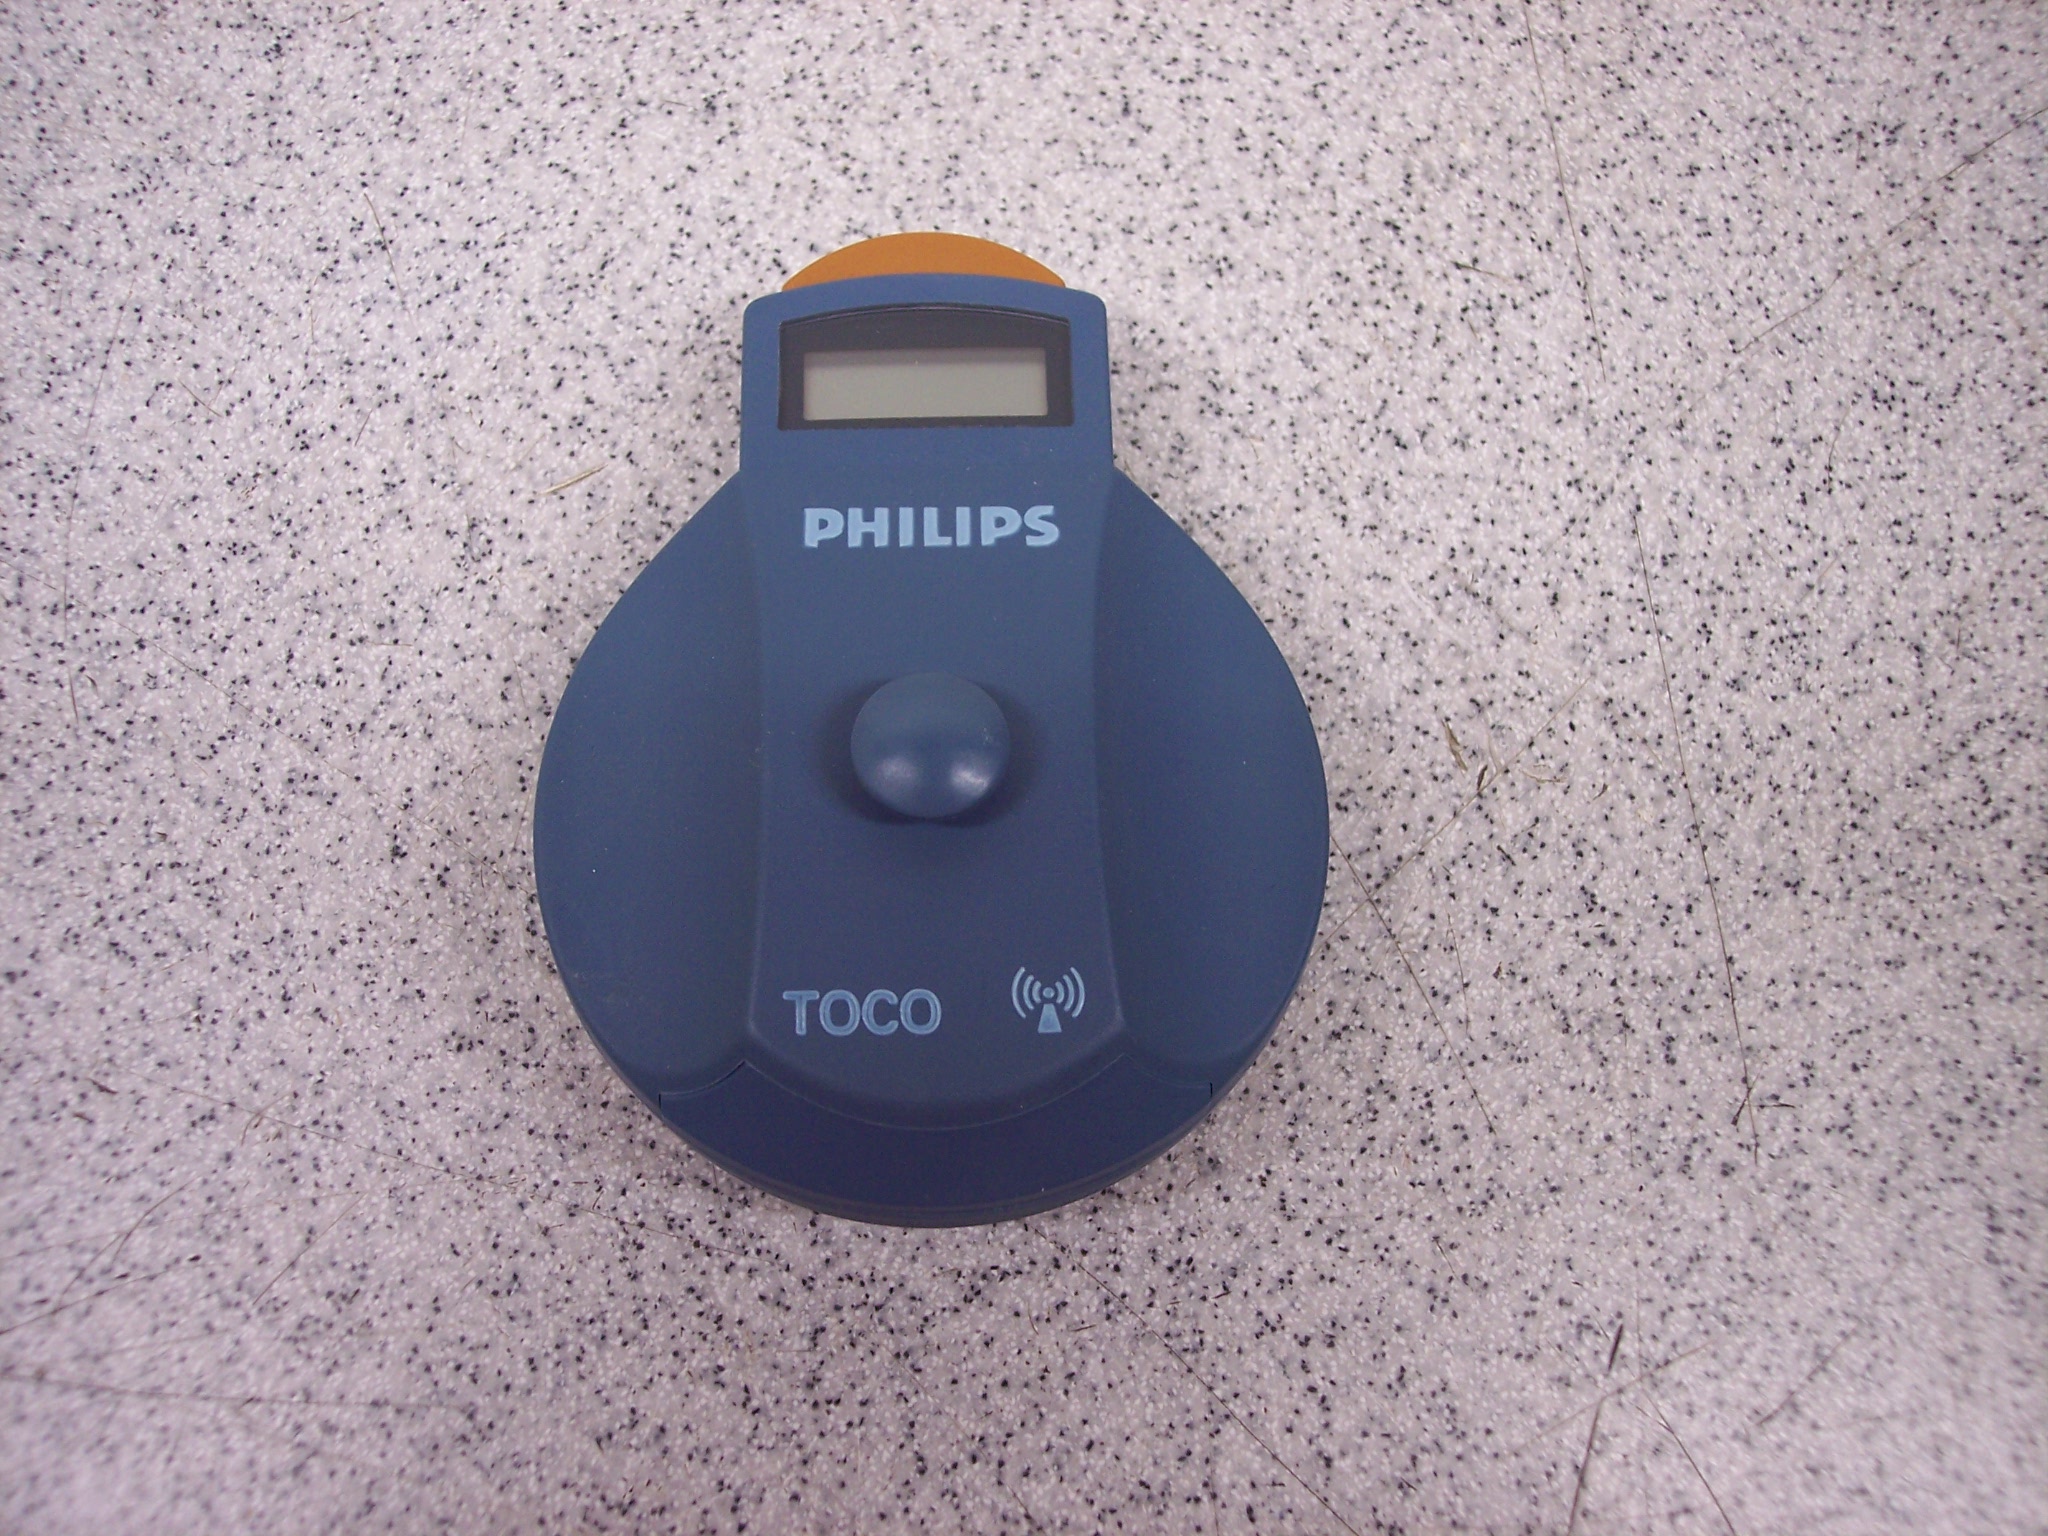 Philips M2725A Wireless Toco Transducer